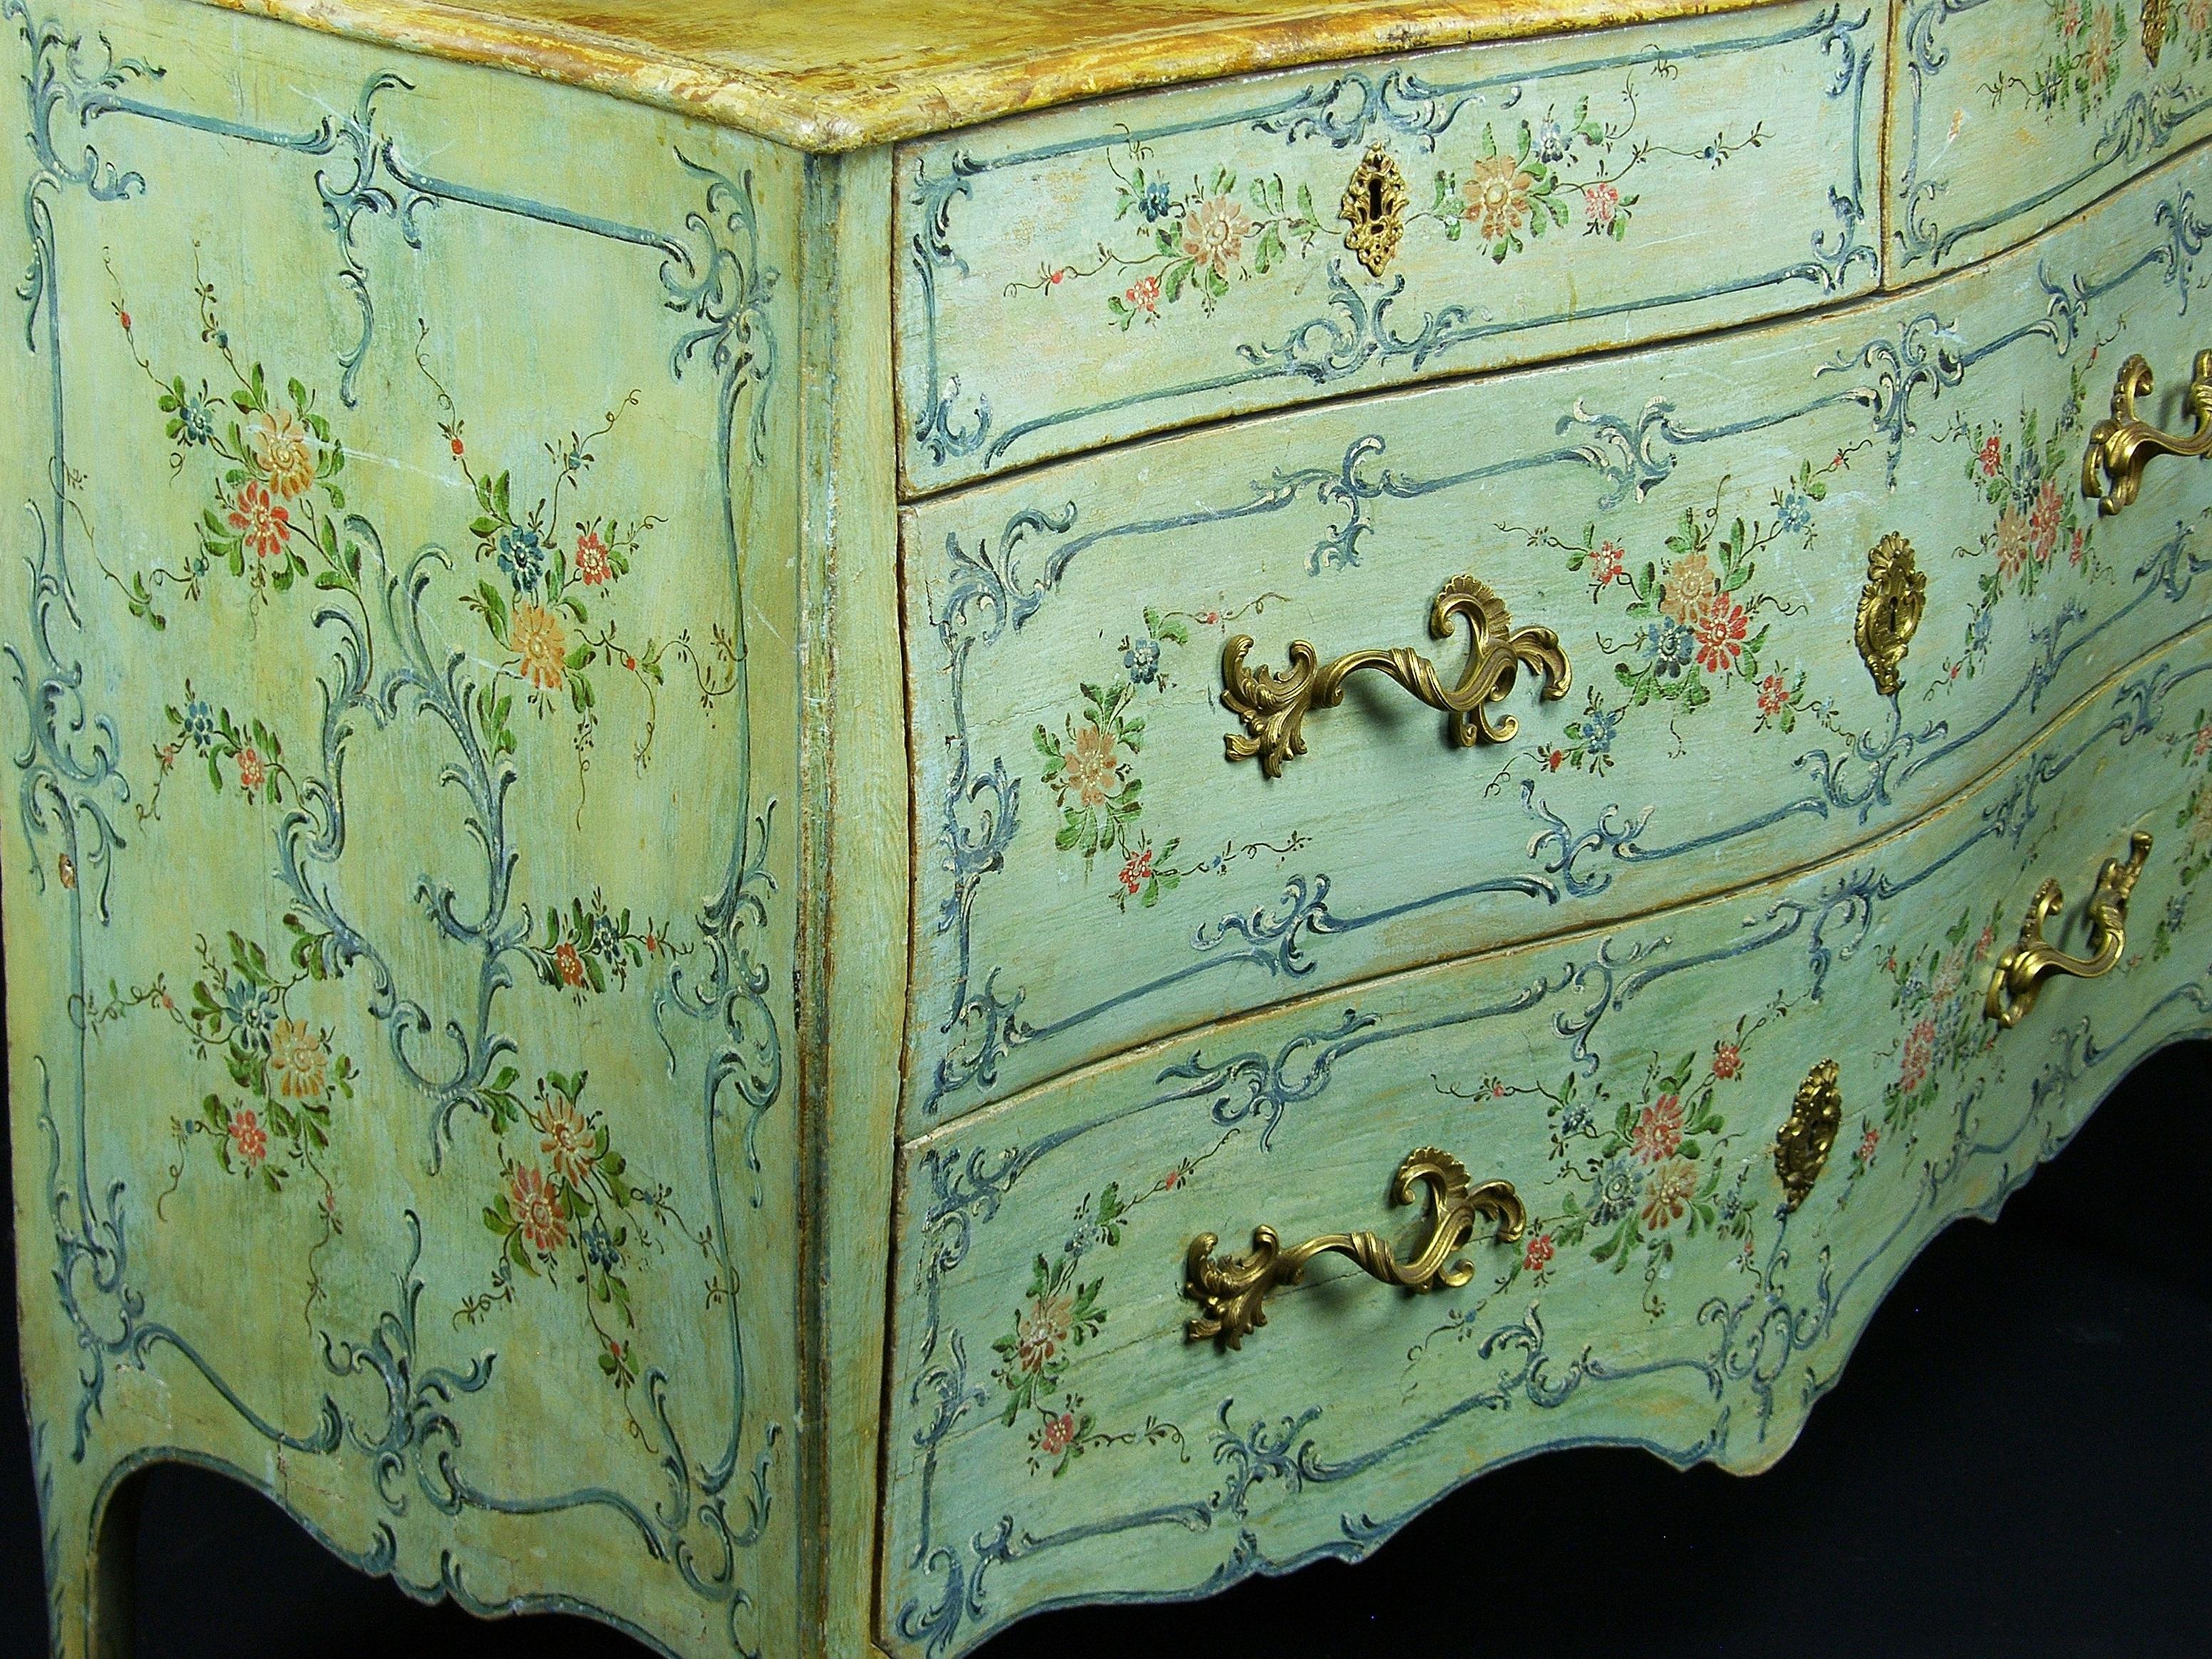 18th Century Italian Polychrome Lacquered Wooden Dresser with Floral Decorations 4